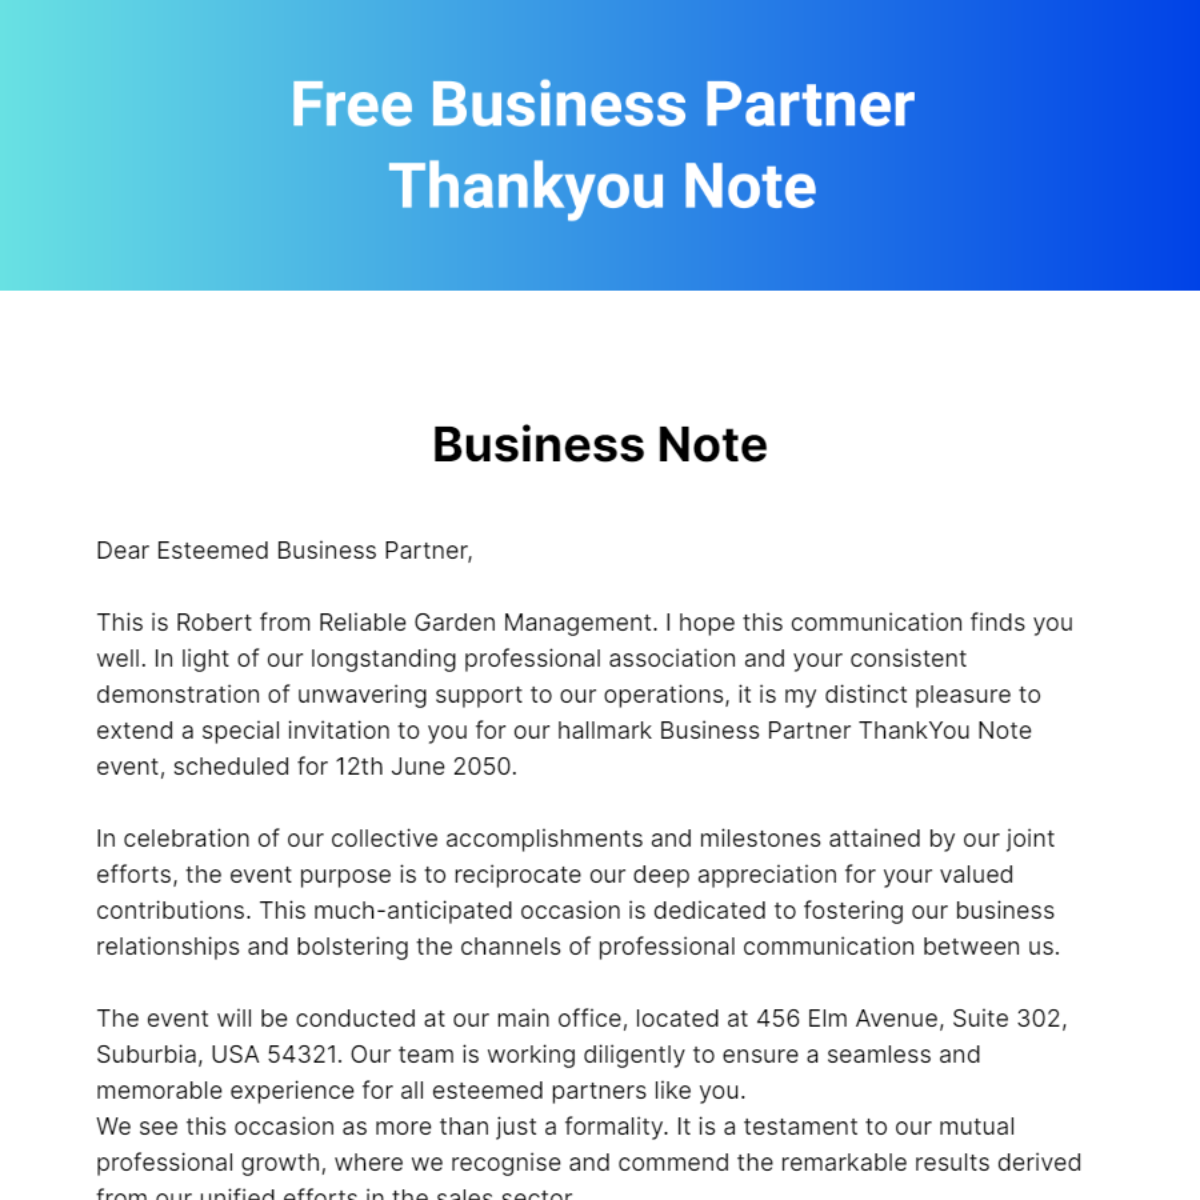 Free Business Partner Thankyou Note Template